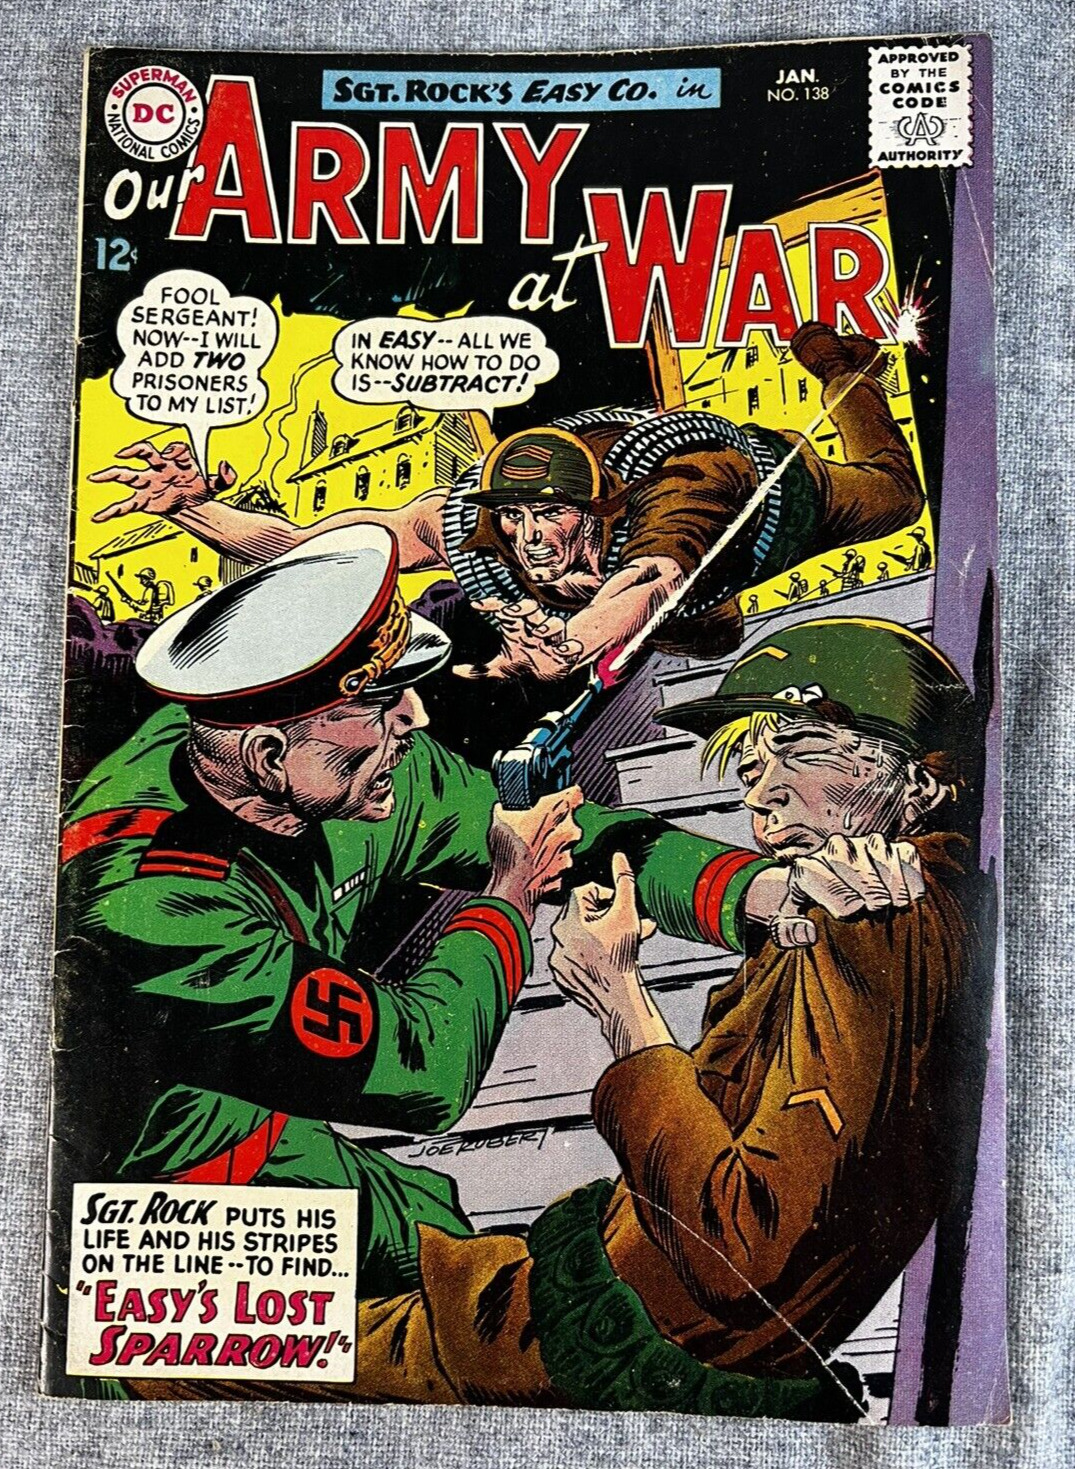 Sgt. Rock Our Army at War #138 DC Comics Easy's Lost Sparrow January 1964, VG